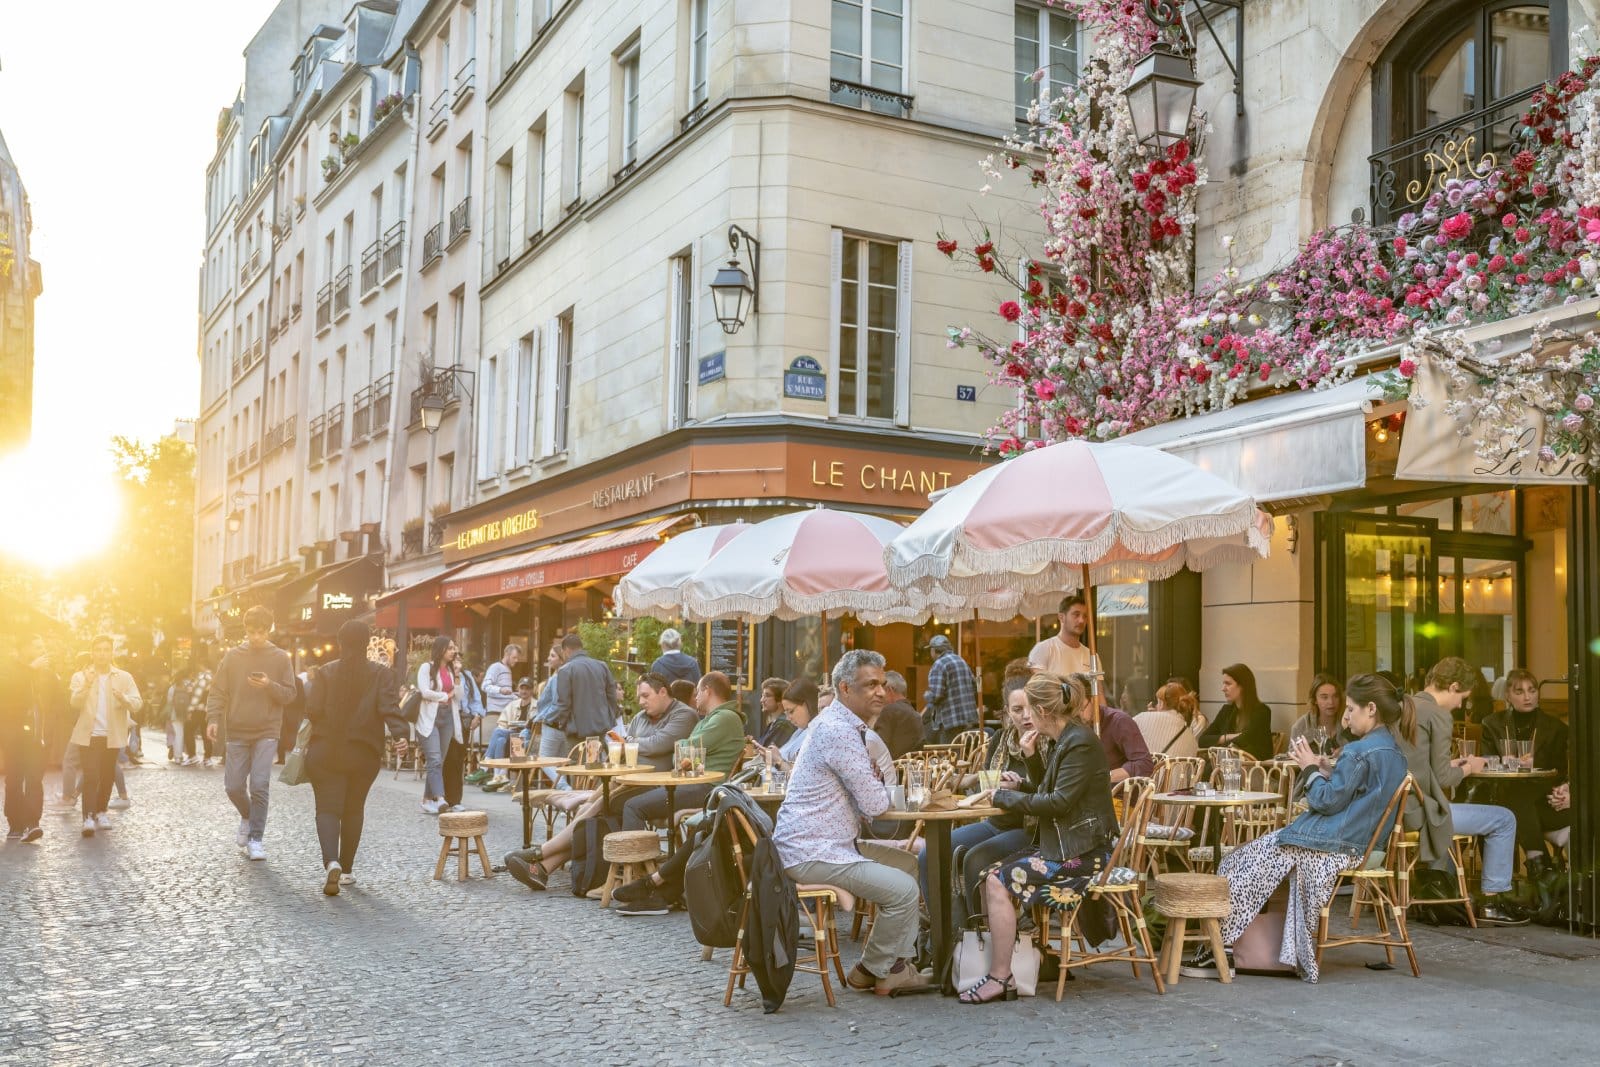 <p class="wp-caption-text">Image Credit: Shutterstock / Page Light Studios</p>  <p>In Paris, there’s growing exasperation with American tourists who come with little respect for local culture, expecting everything to be like back home, including demanding service in English.</p>